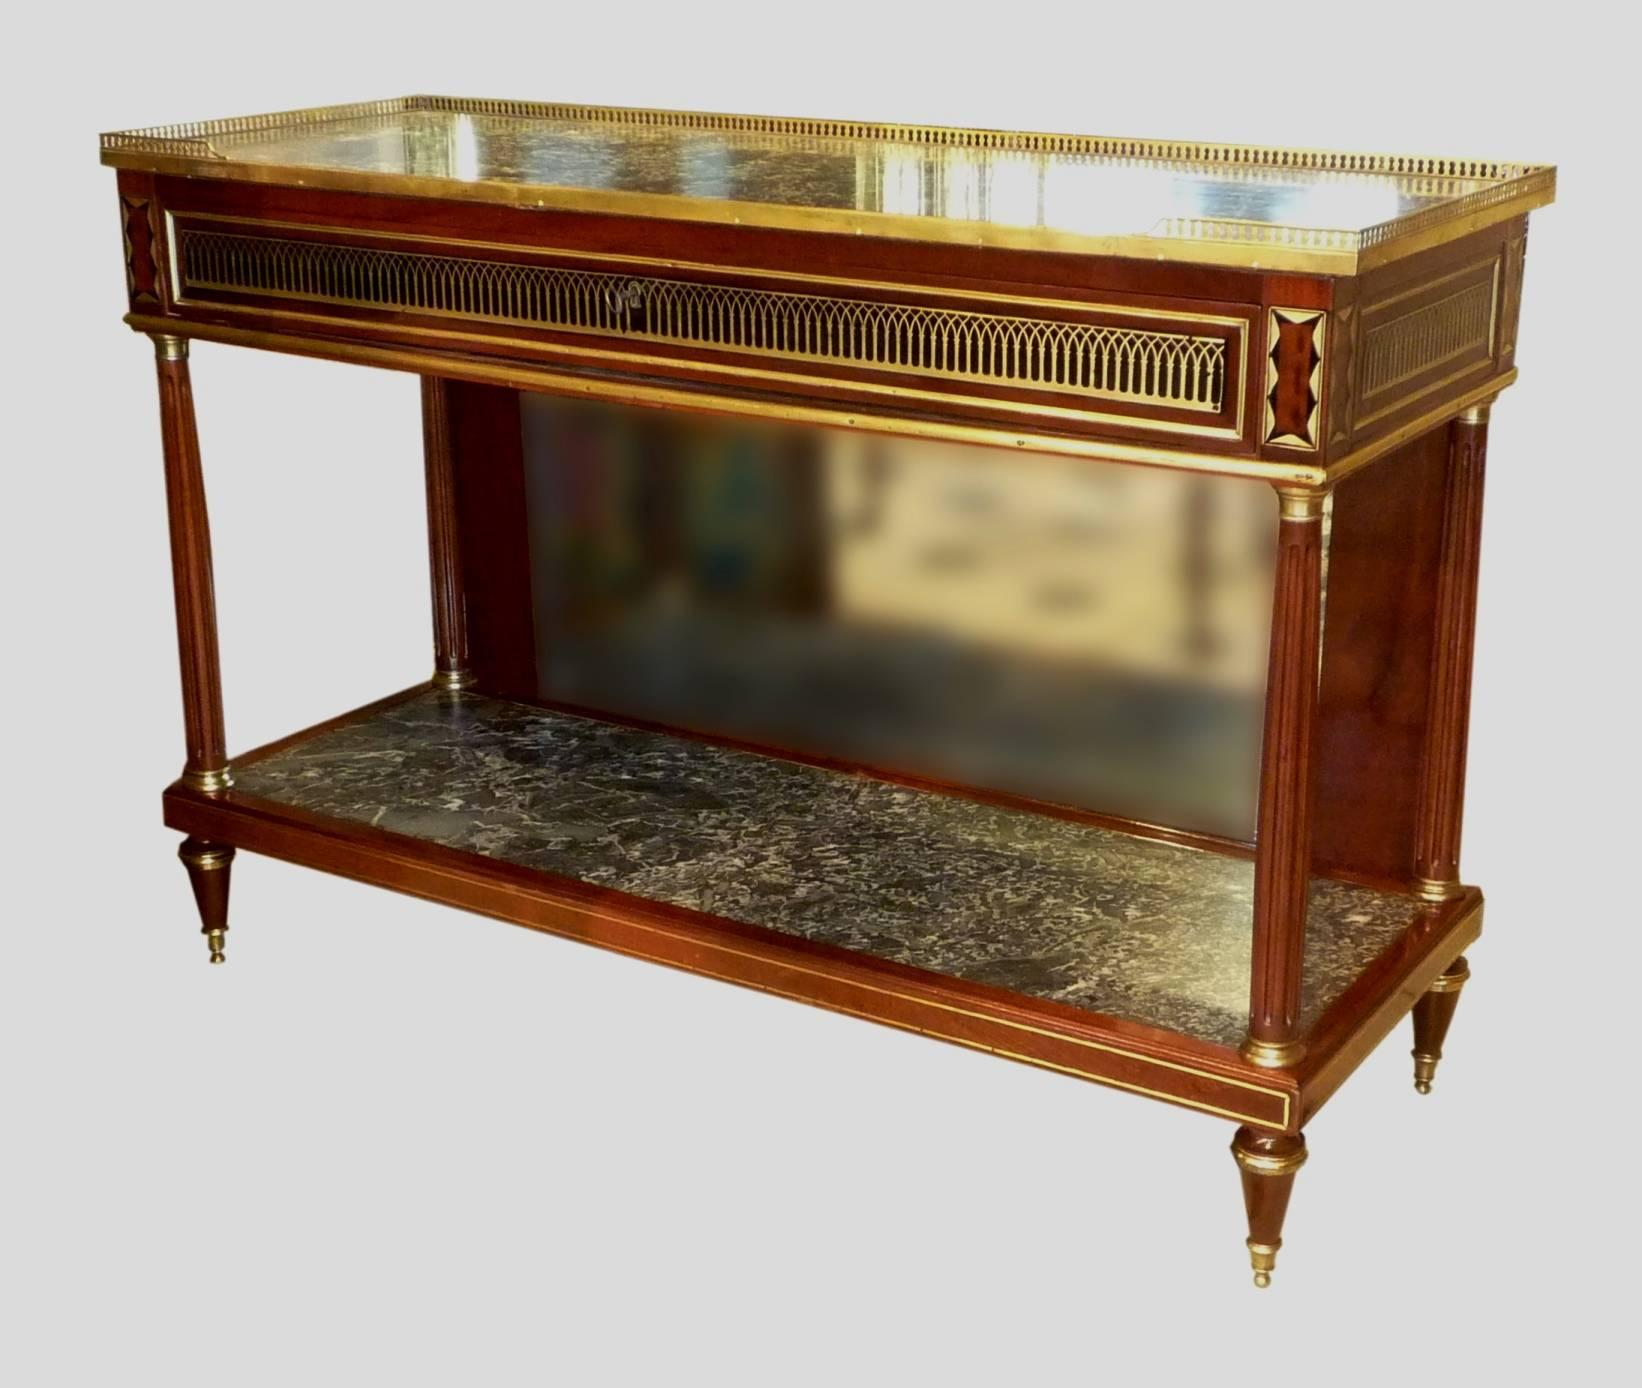 A French Directoire mahogany, brass and gilt bronze console desserte, with two Saint-Anne grey marble tops (one with a small restoration), circa 1800.